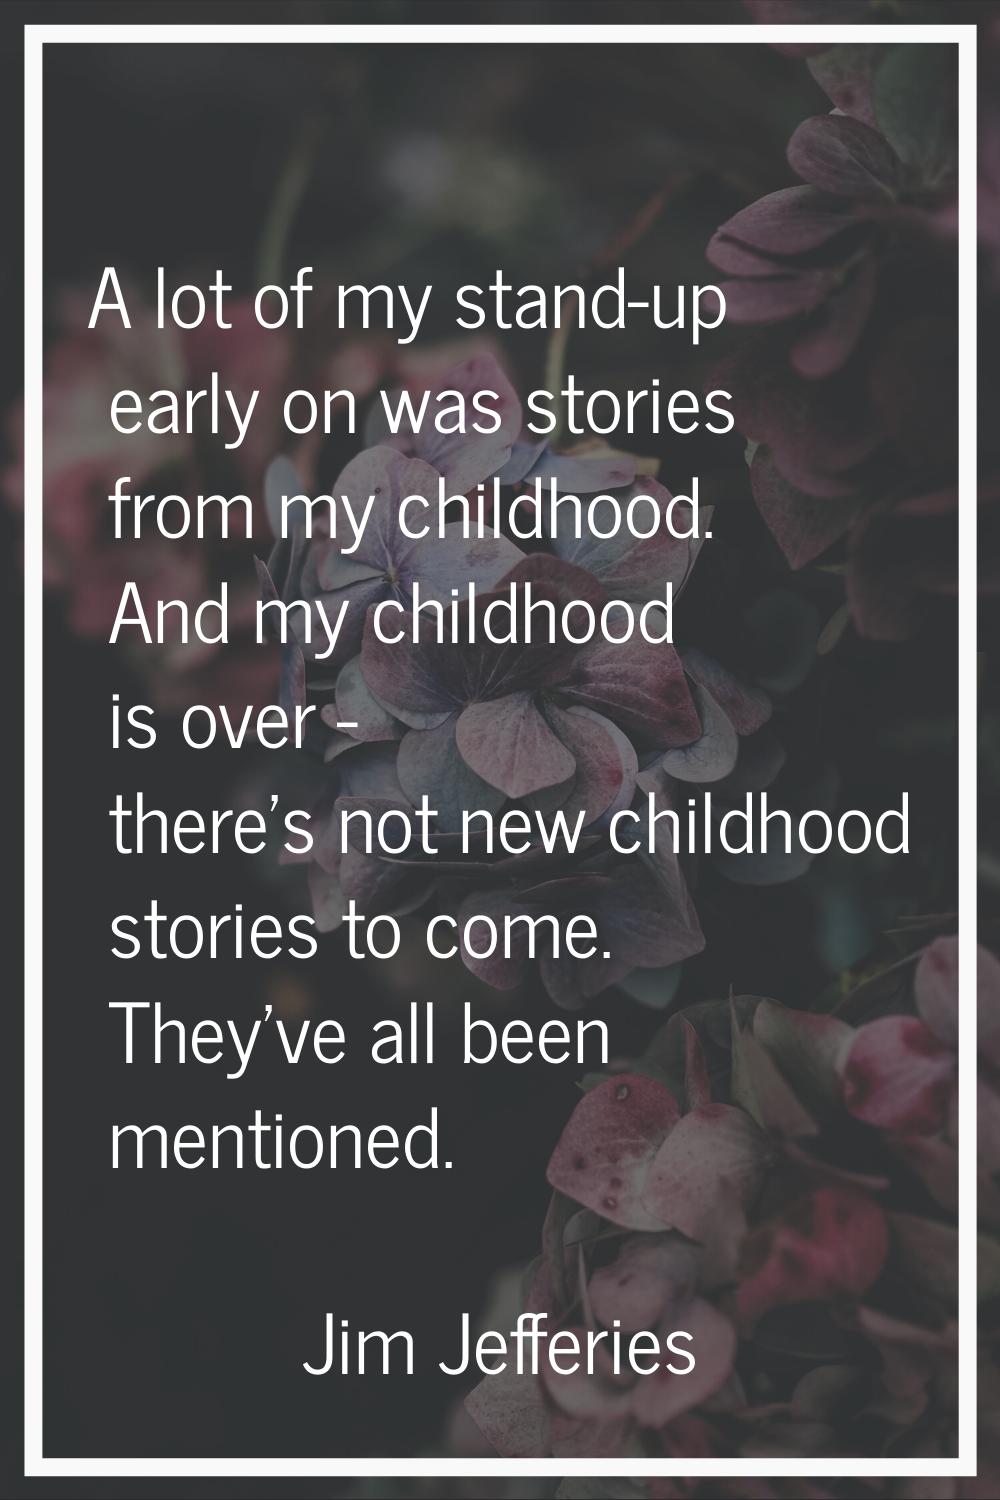 A lot of my stand-up early on was stories from my childhood. And my childhood is over - there's not